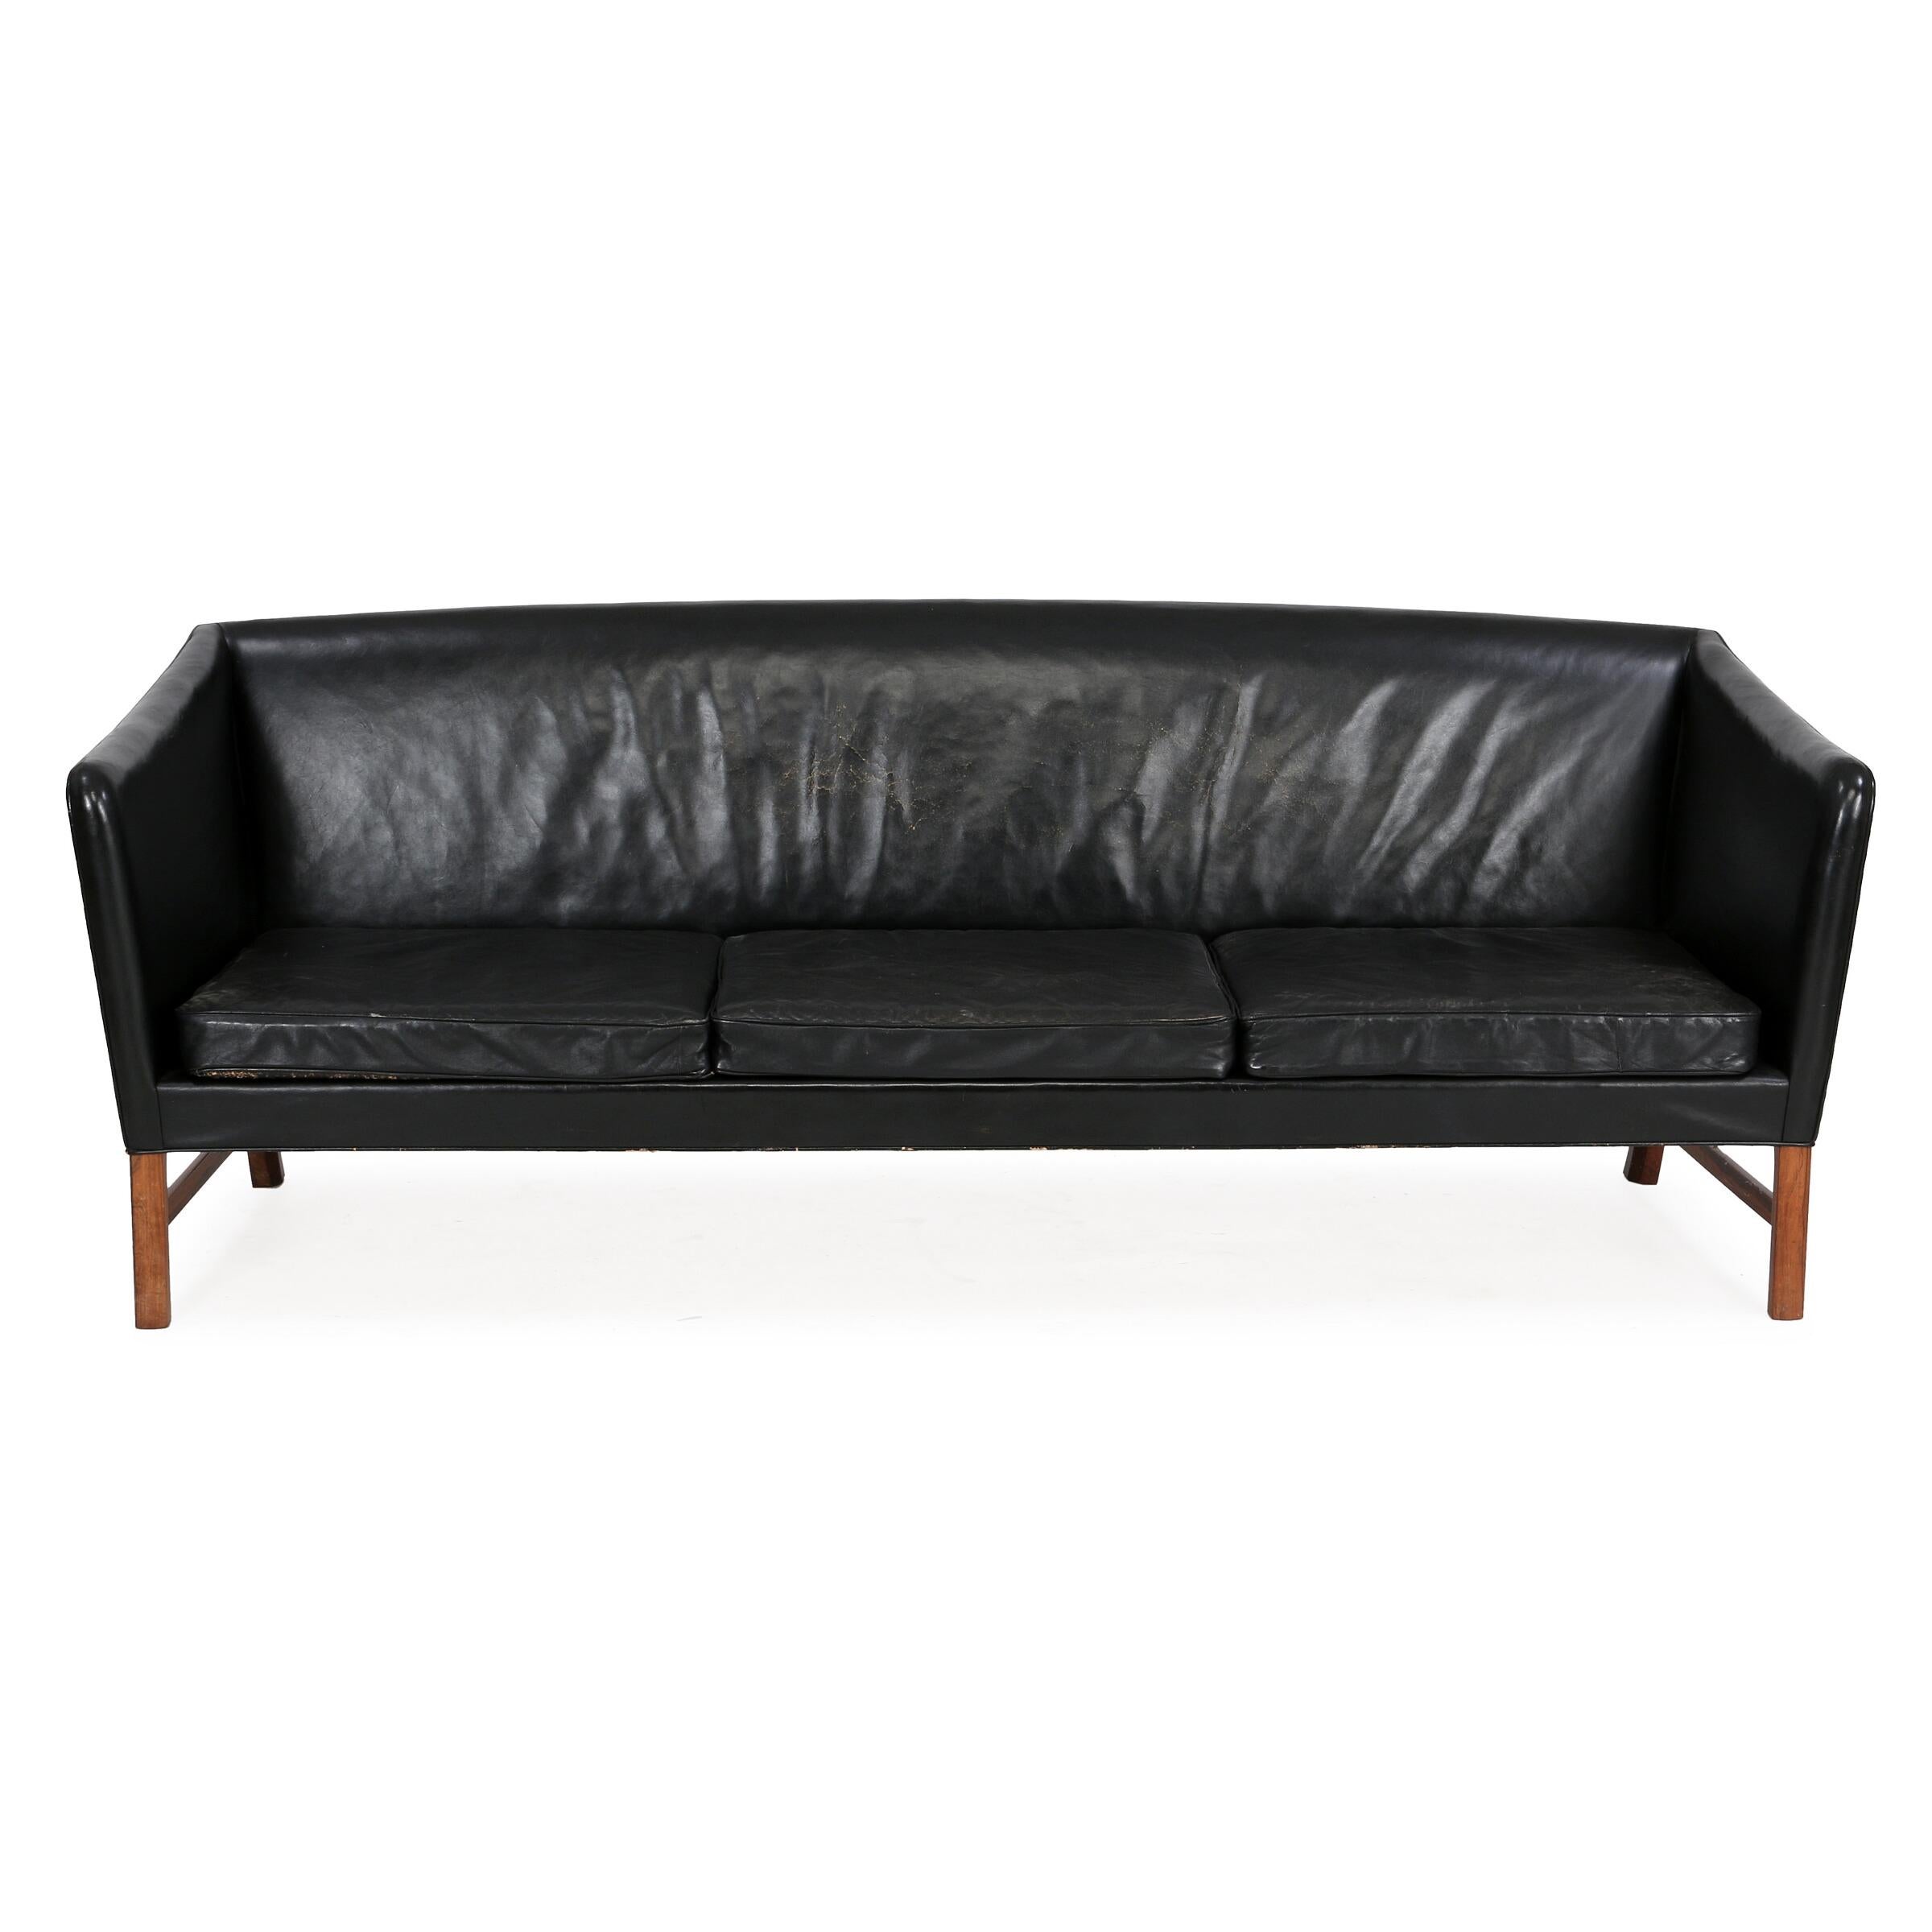 Freestanding three seater sofa with Brazilian rosewood frame by Ole Wanscher. Seat, sides and back upholstered with black leather. Made by cabinetmaker A. J. Iversen.

Fair condition with some crackling of leather but no structural issues.